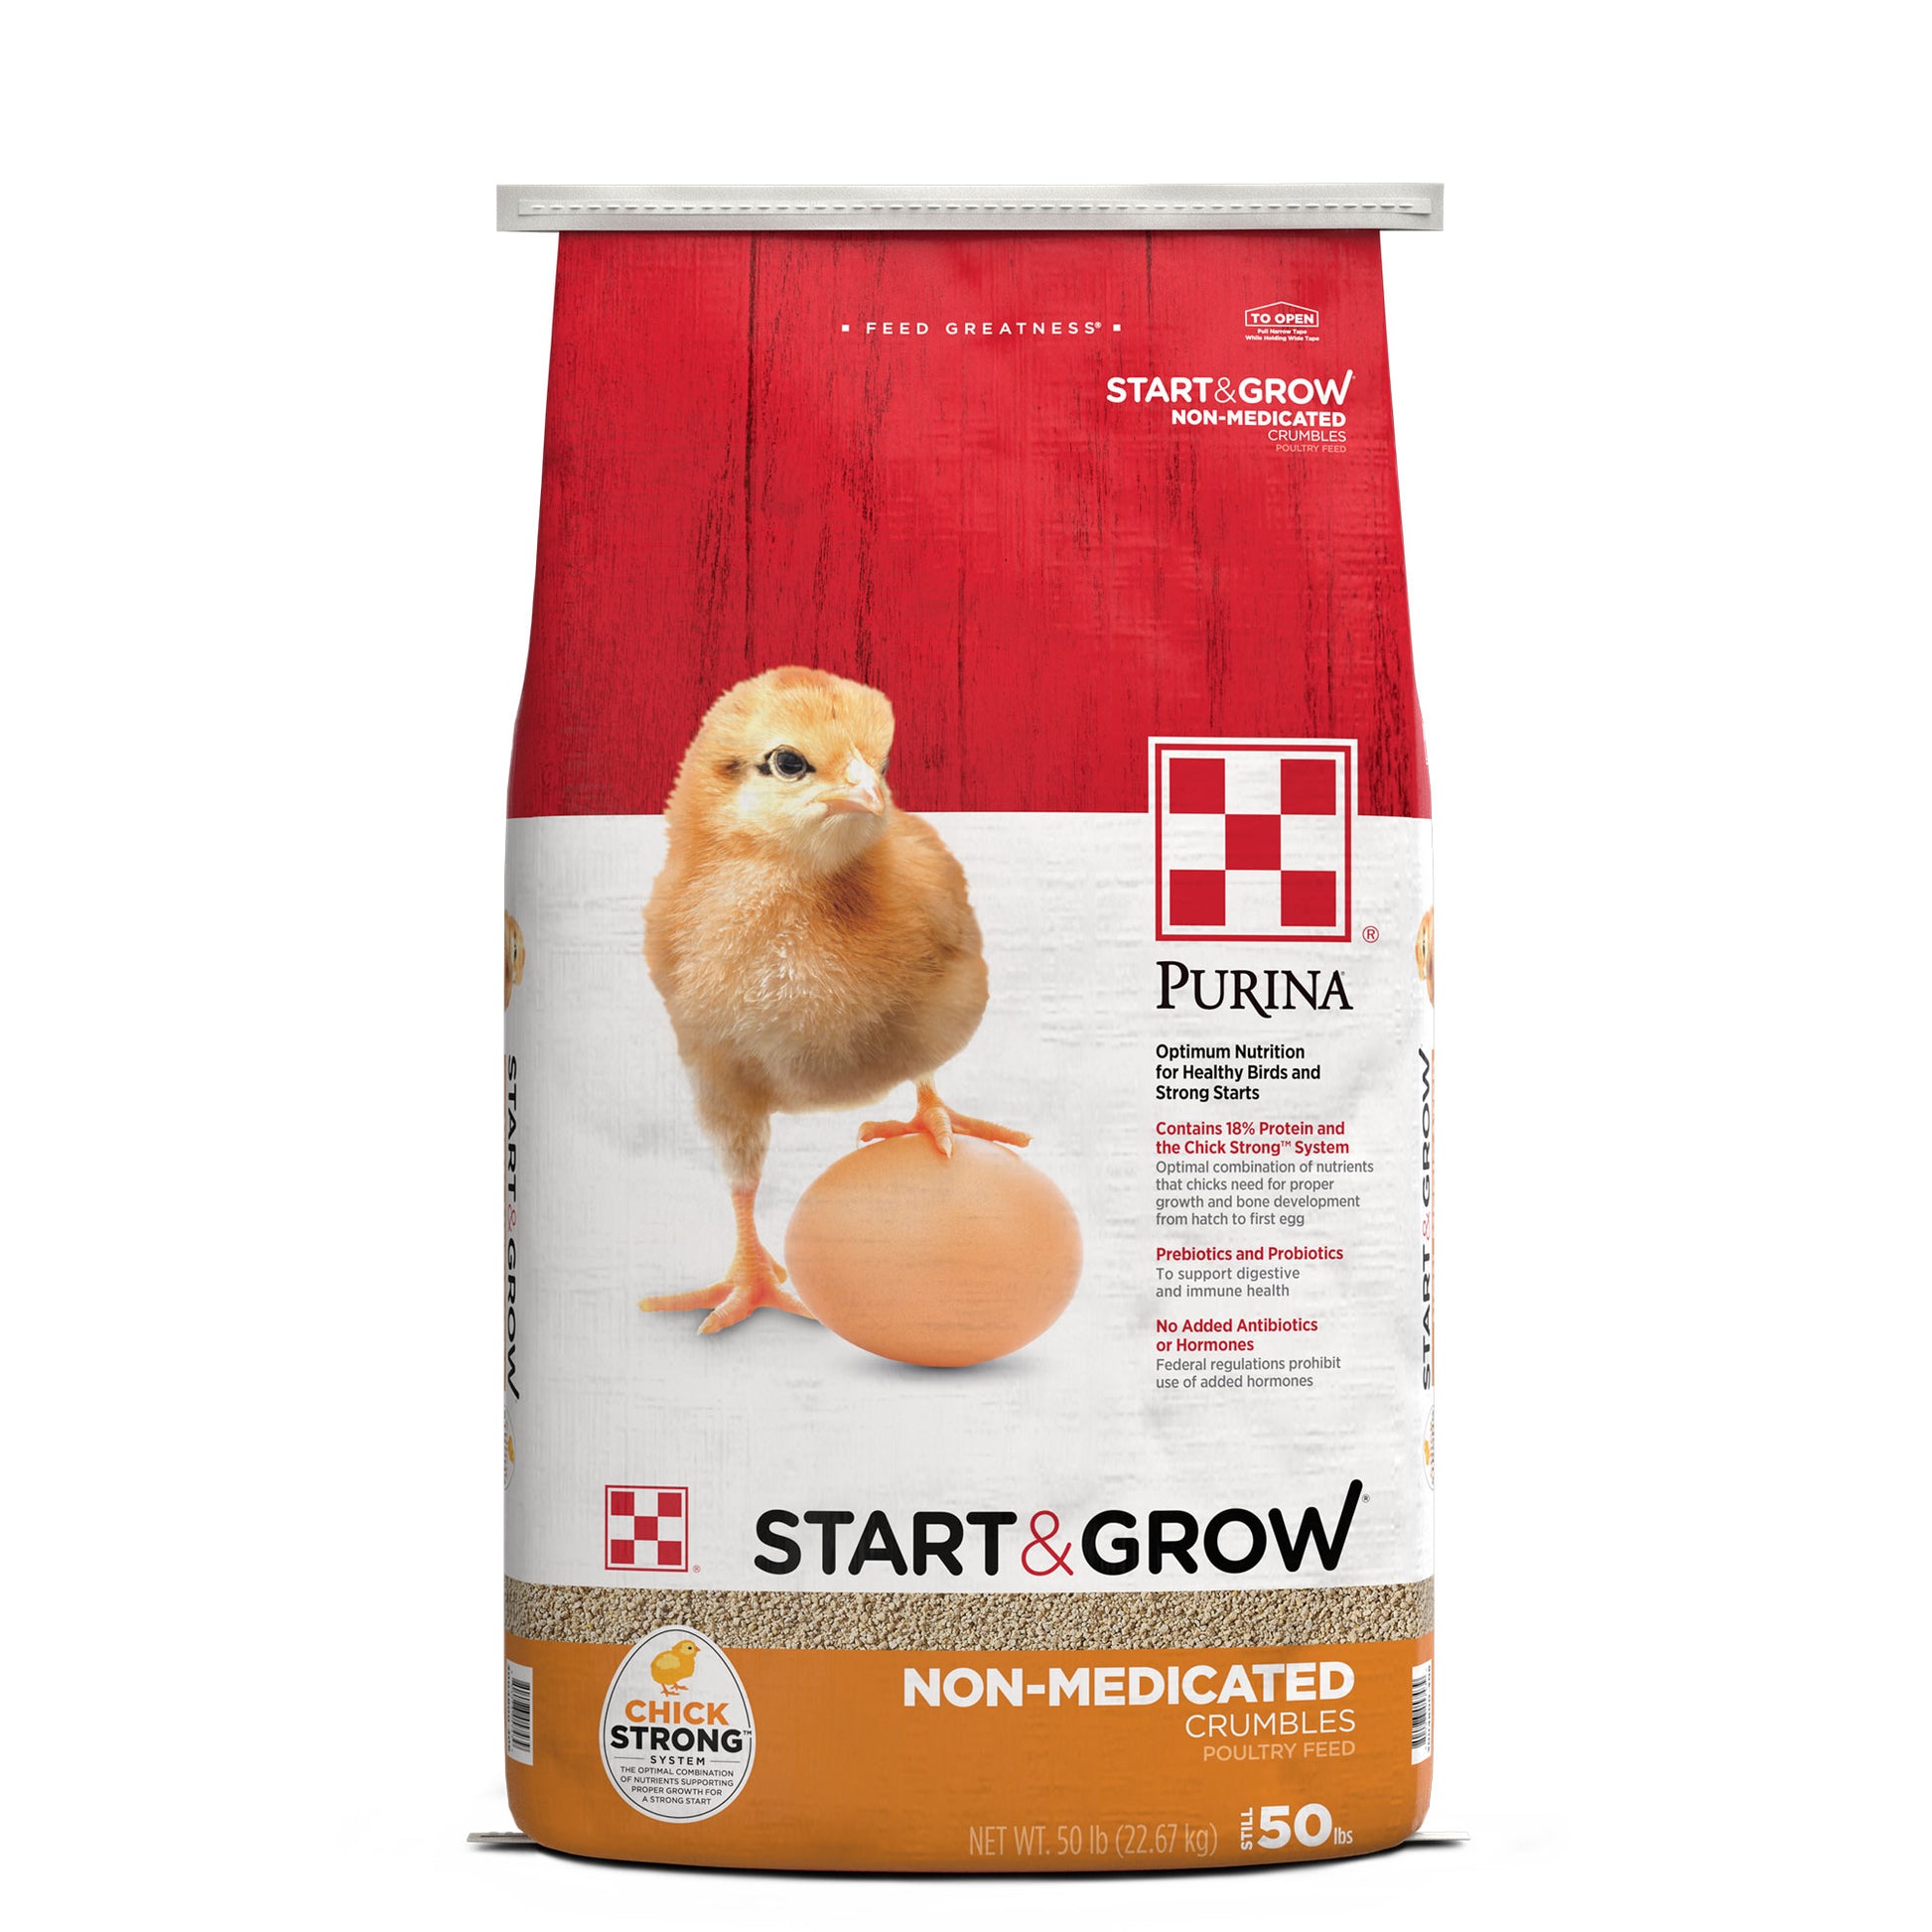 Purina Start & Grow poultry feed 50 Pound bag